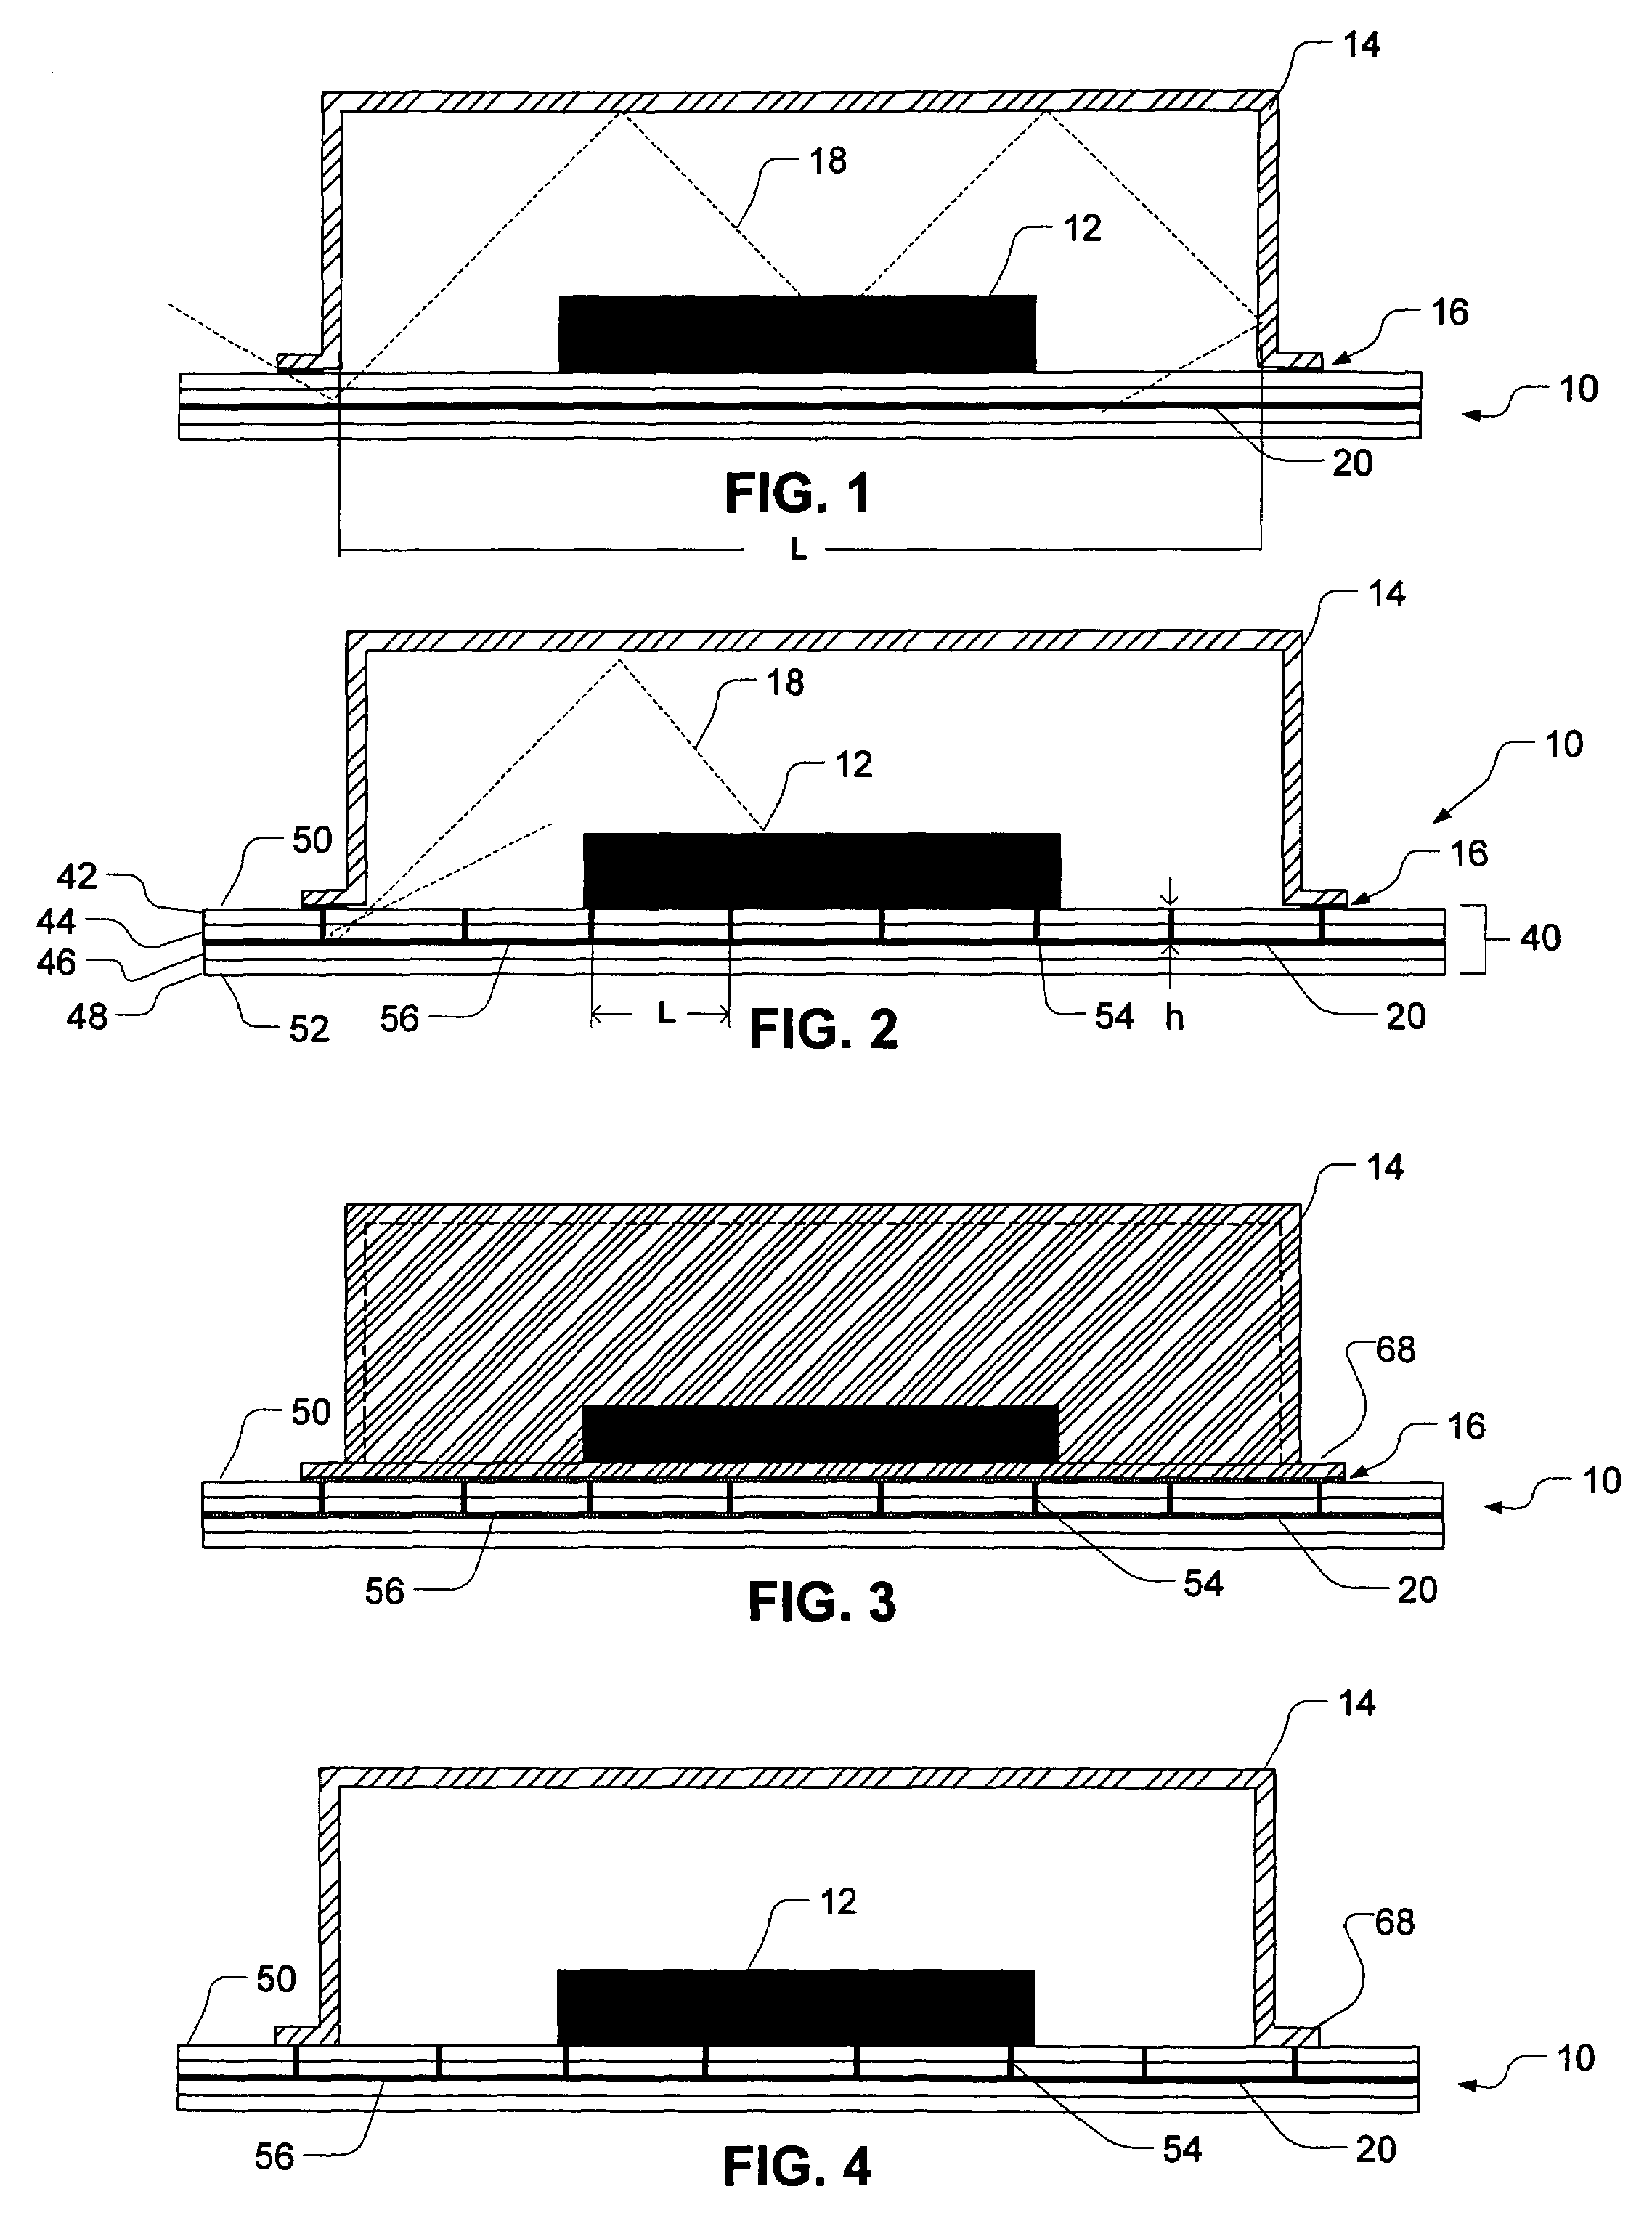 Electromagnetic interference shielding for a printed circuit board